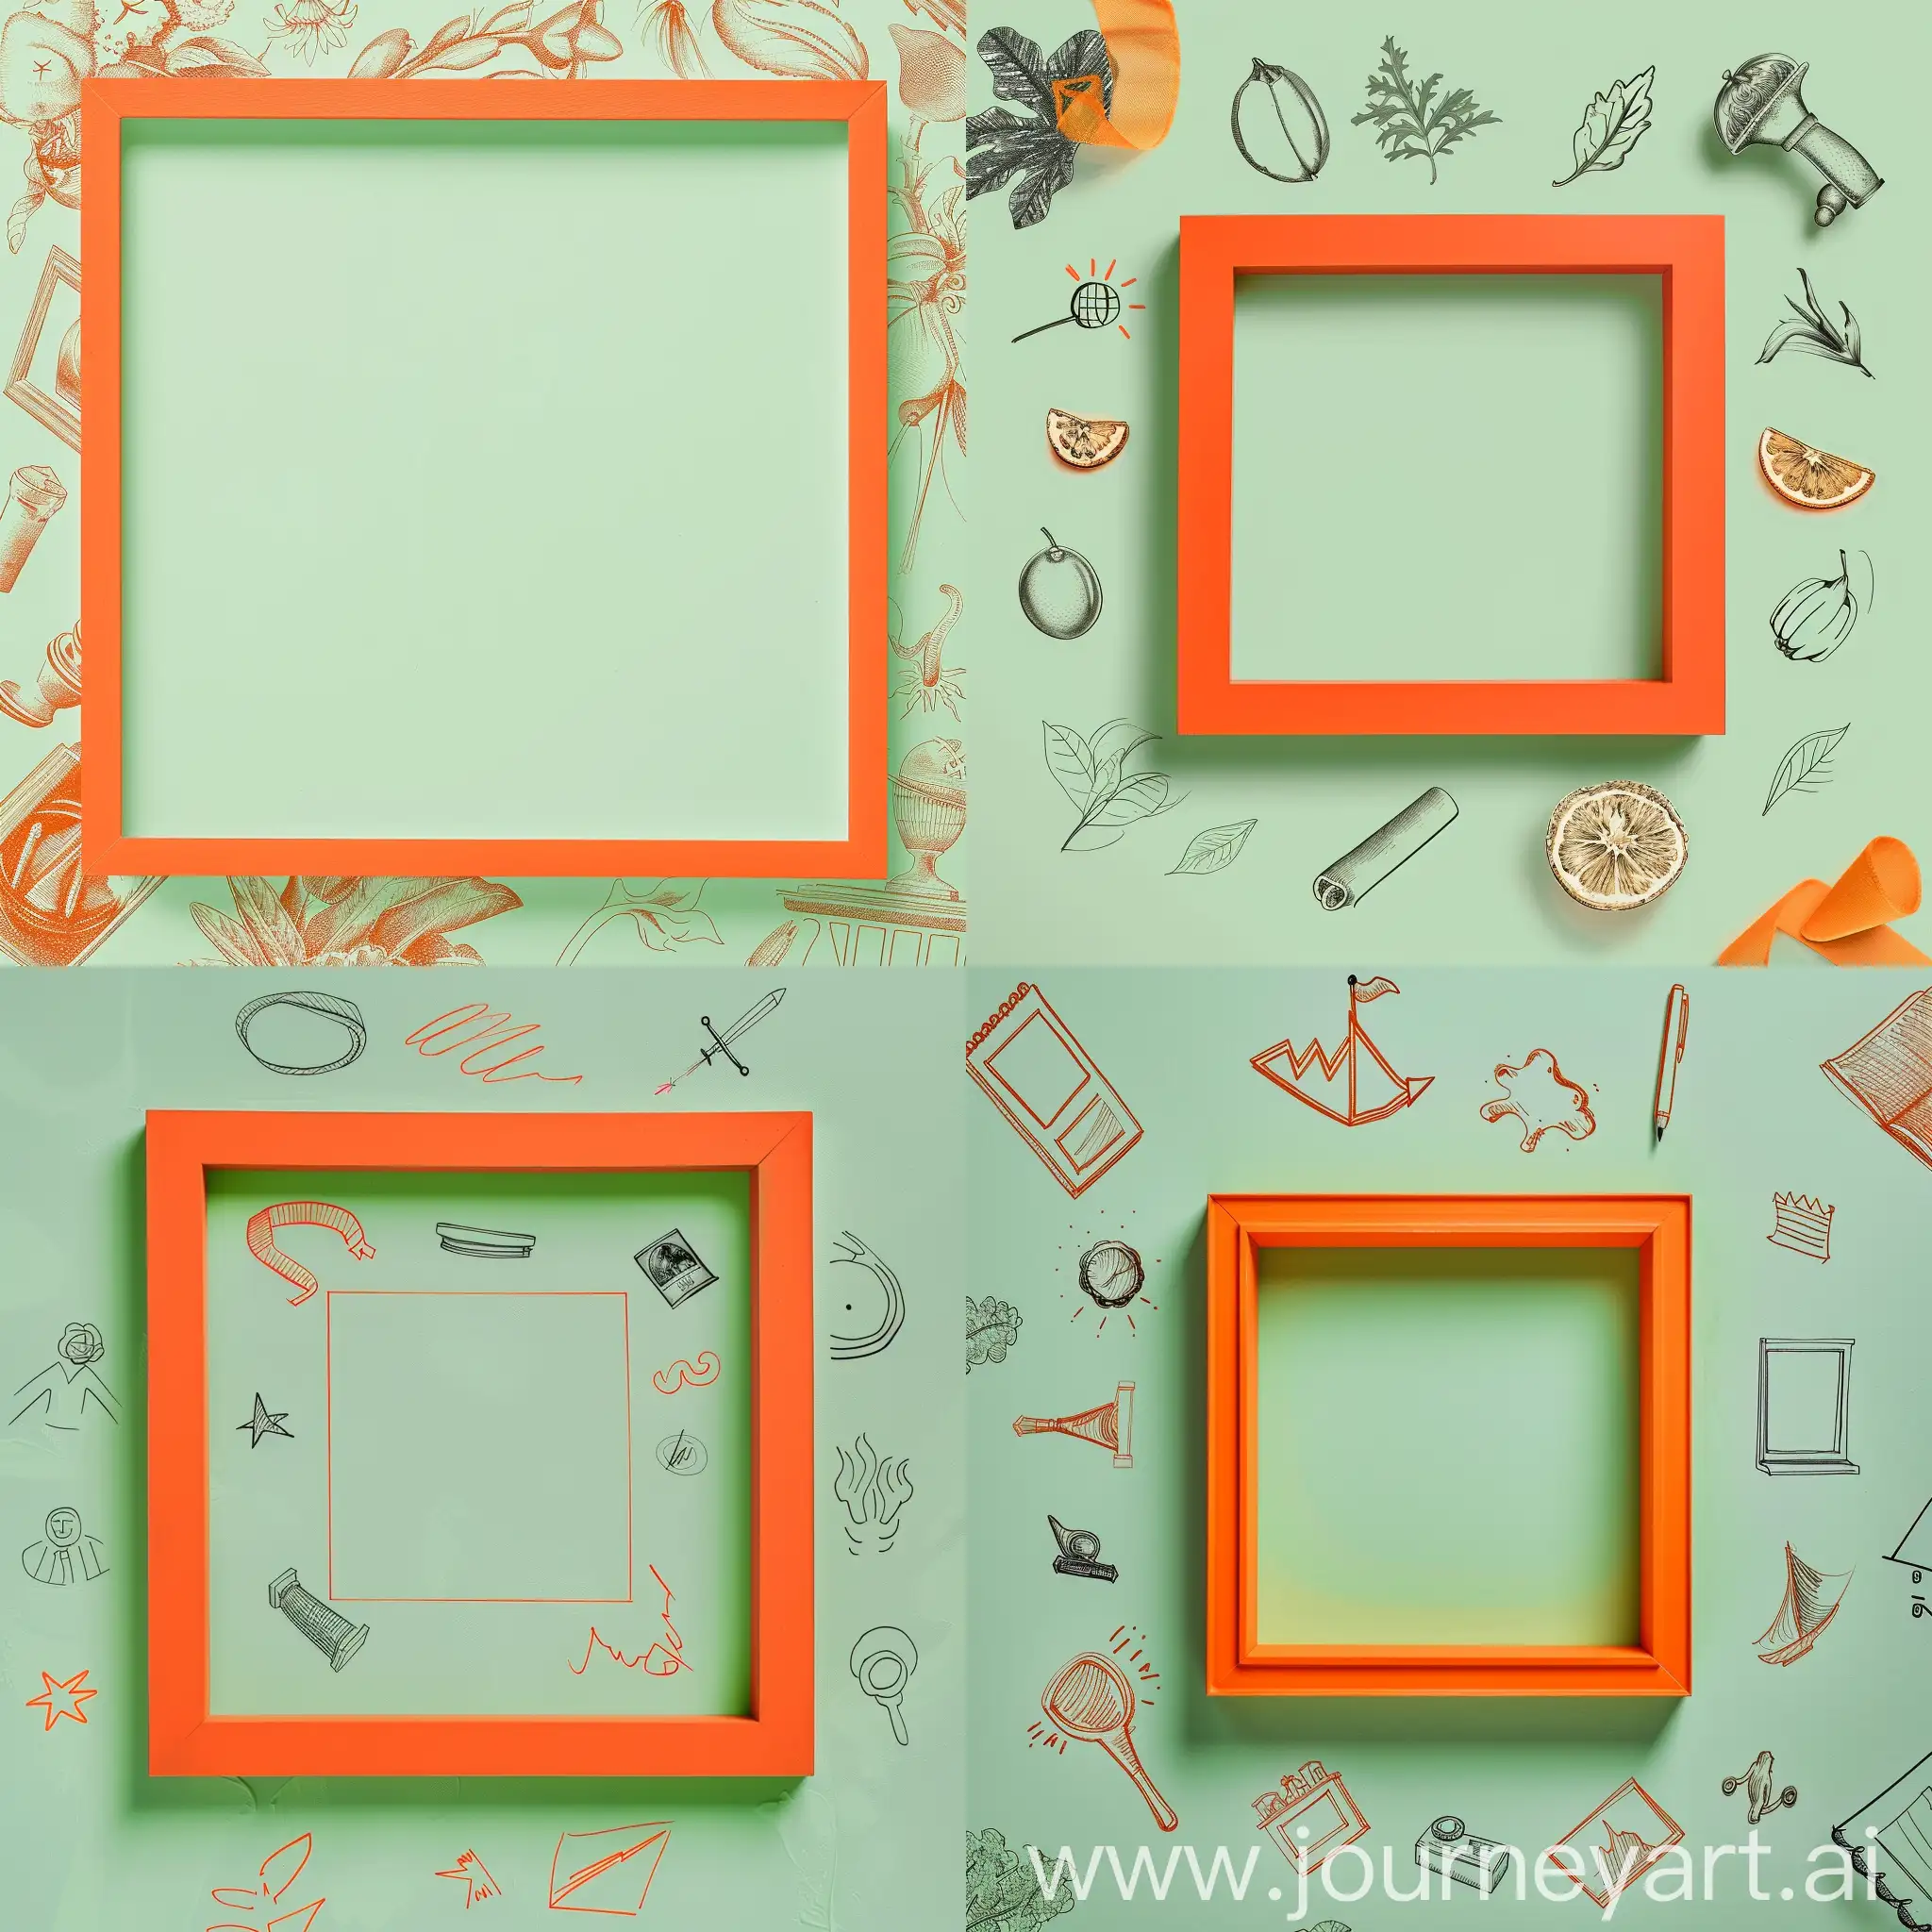 An elegant square frame in bright orange on a light green background with political elements drawn around it